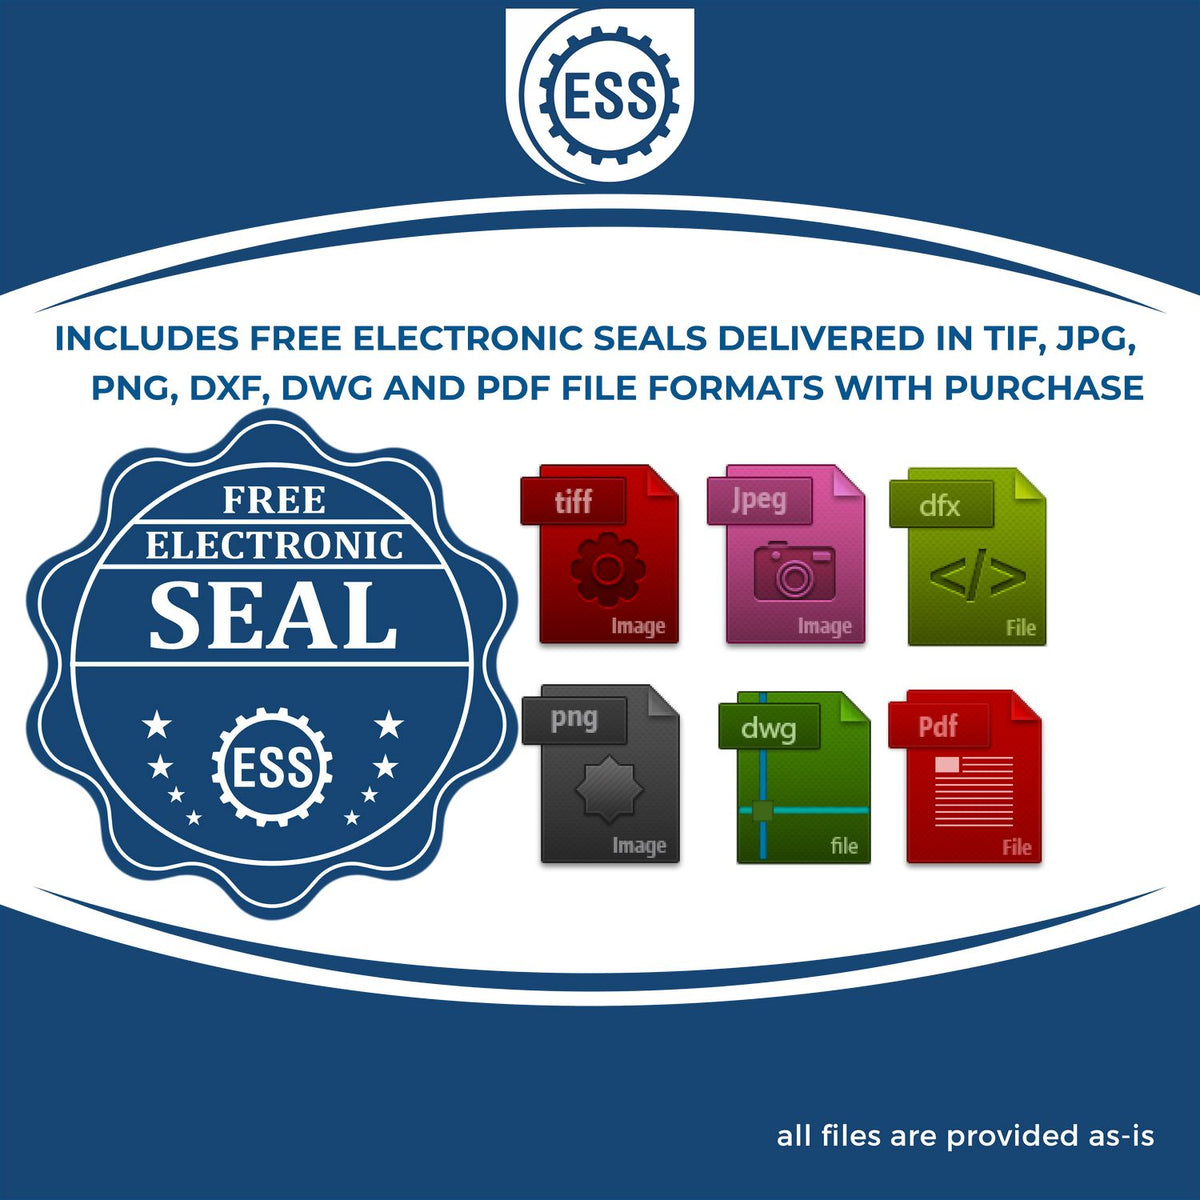 An infographic for the free electronic seal for the Self-Inking Florida PE Stamp illustrating the different file type icons such as DXF, DWG, TIF, JPG and PNG.